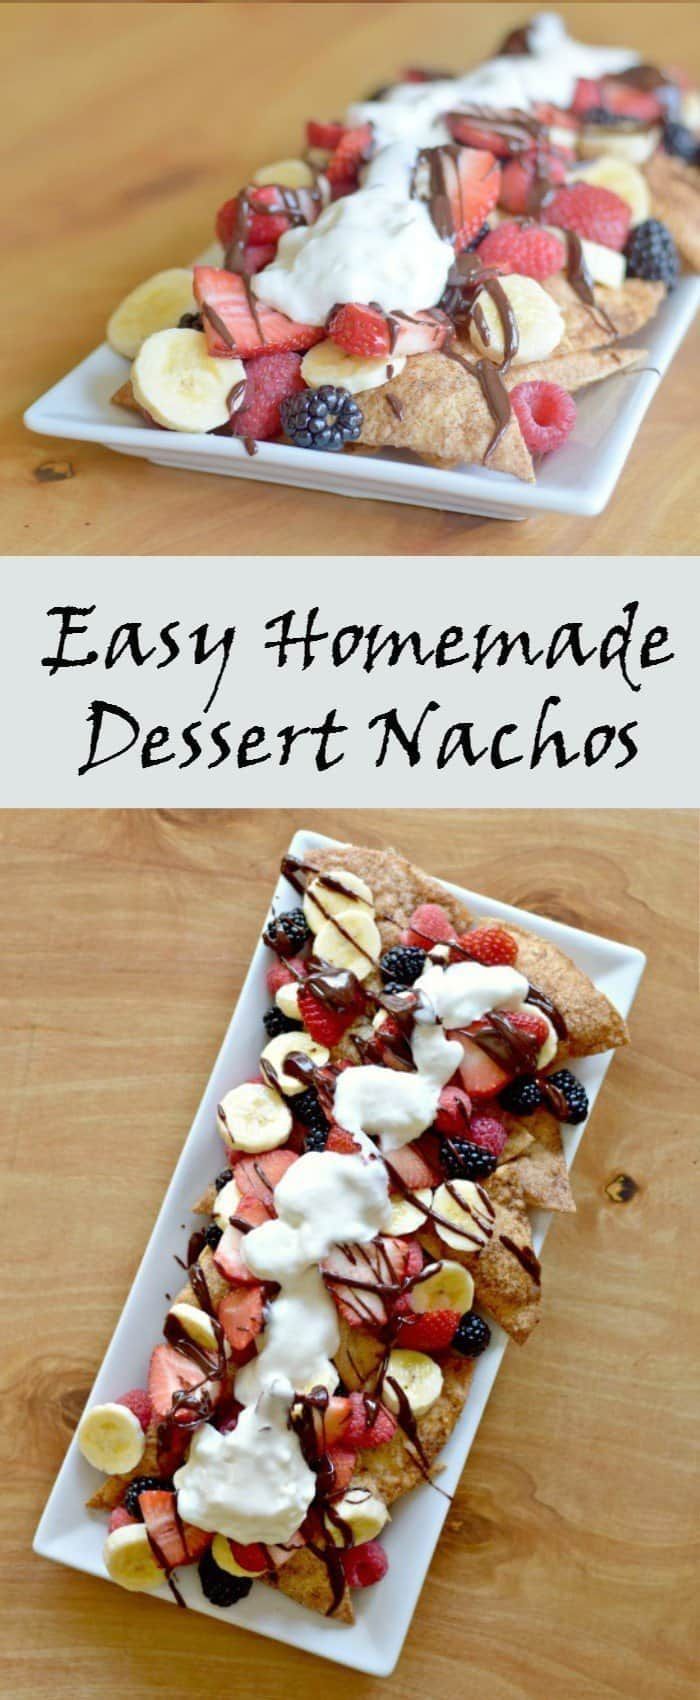 Dessert Nachos: Simple and Light Recipe with a Mexican Twist -   17 desserts Mexican simple ideas